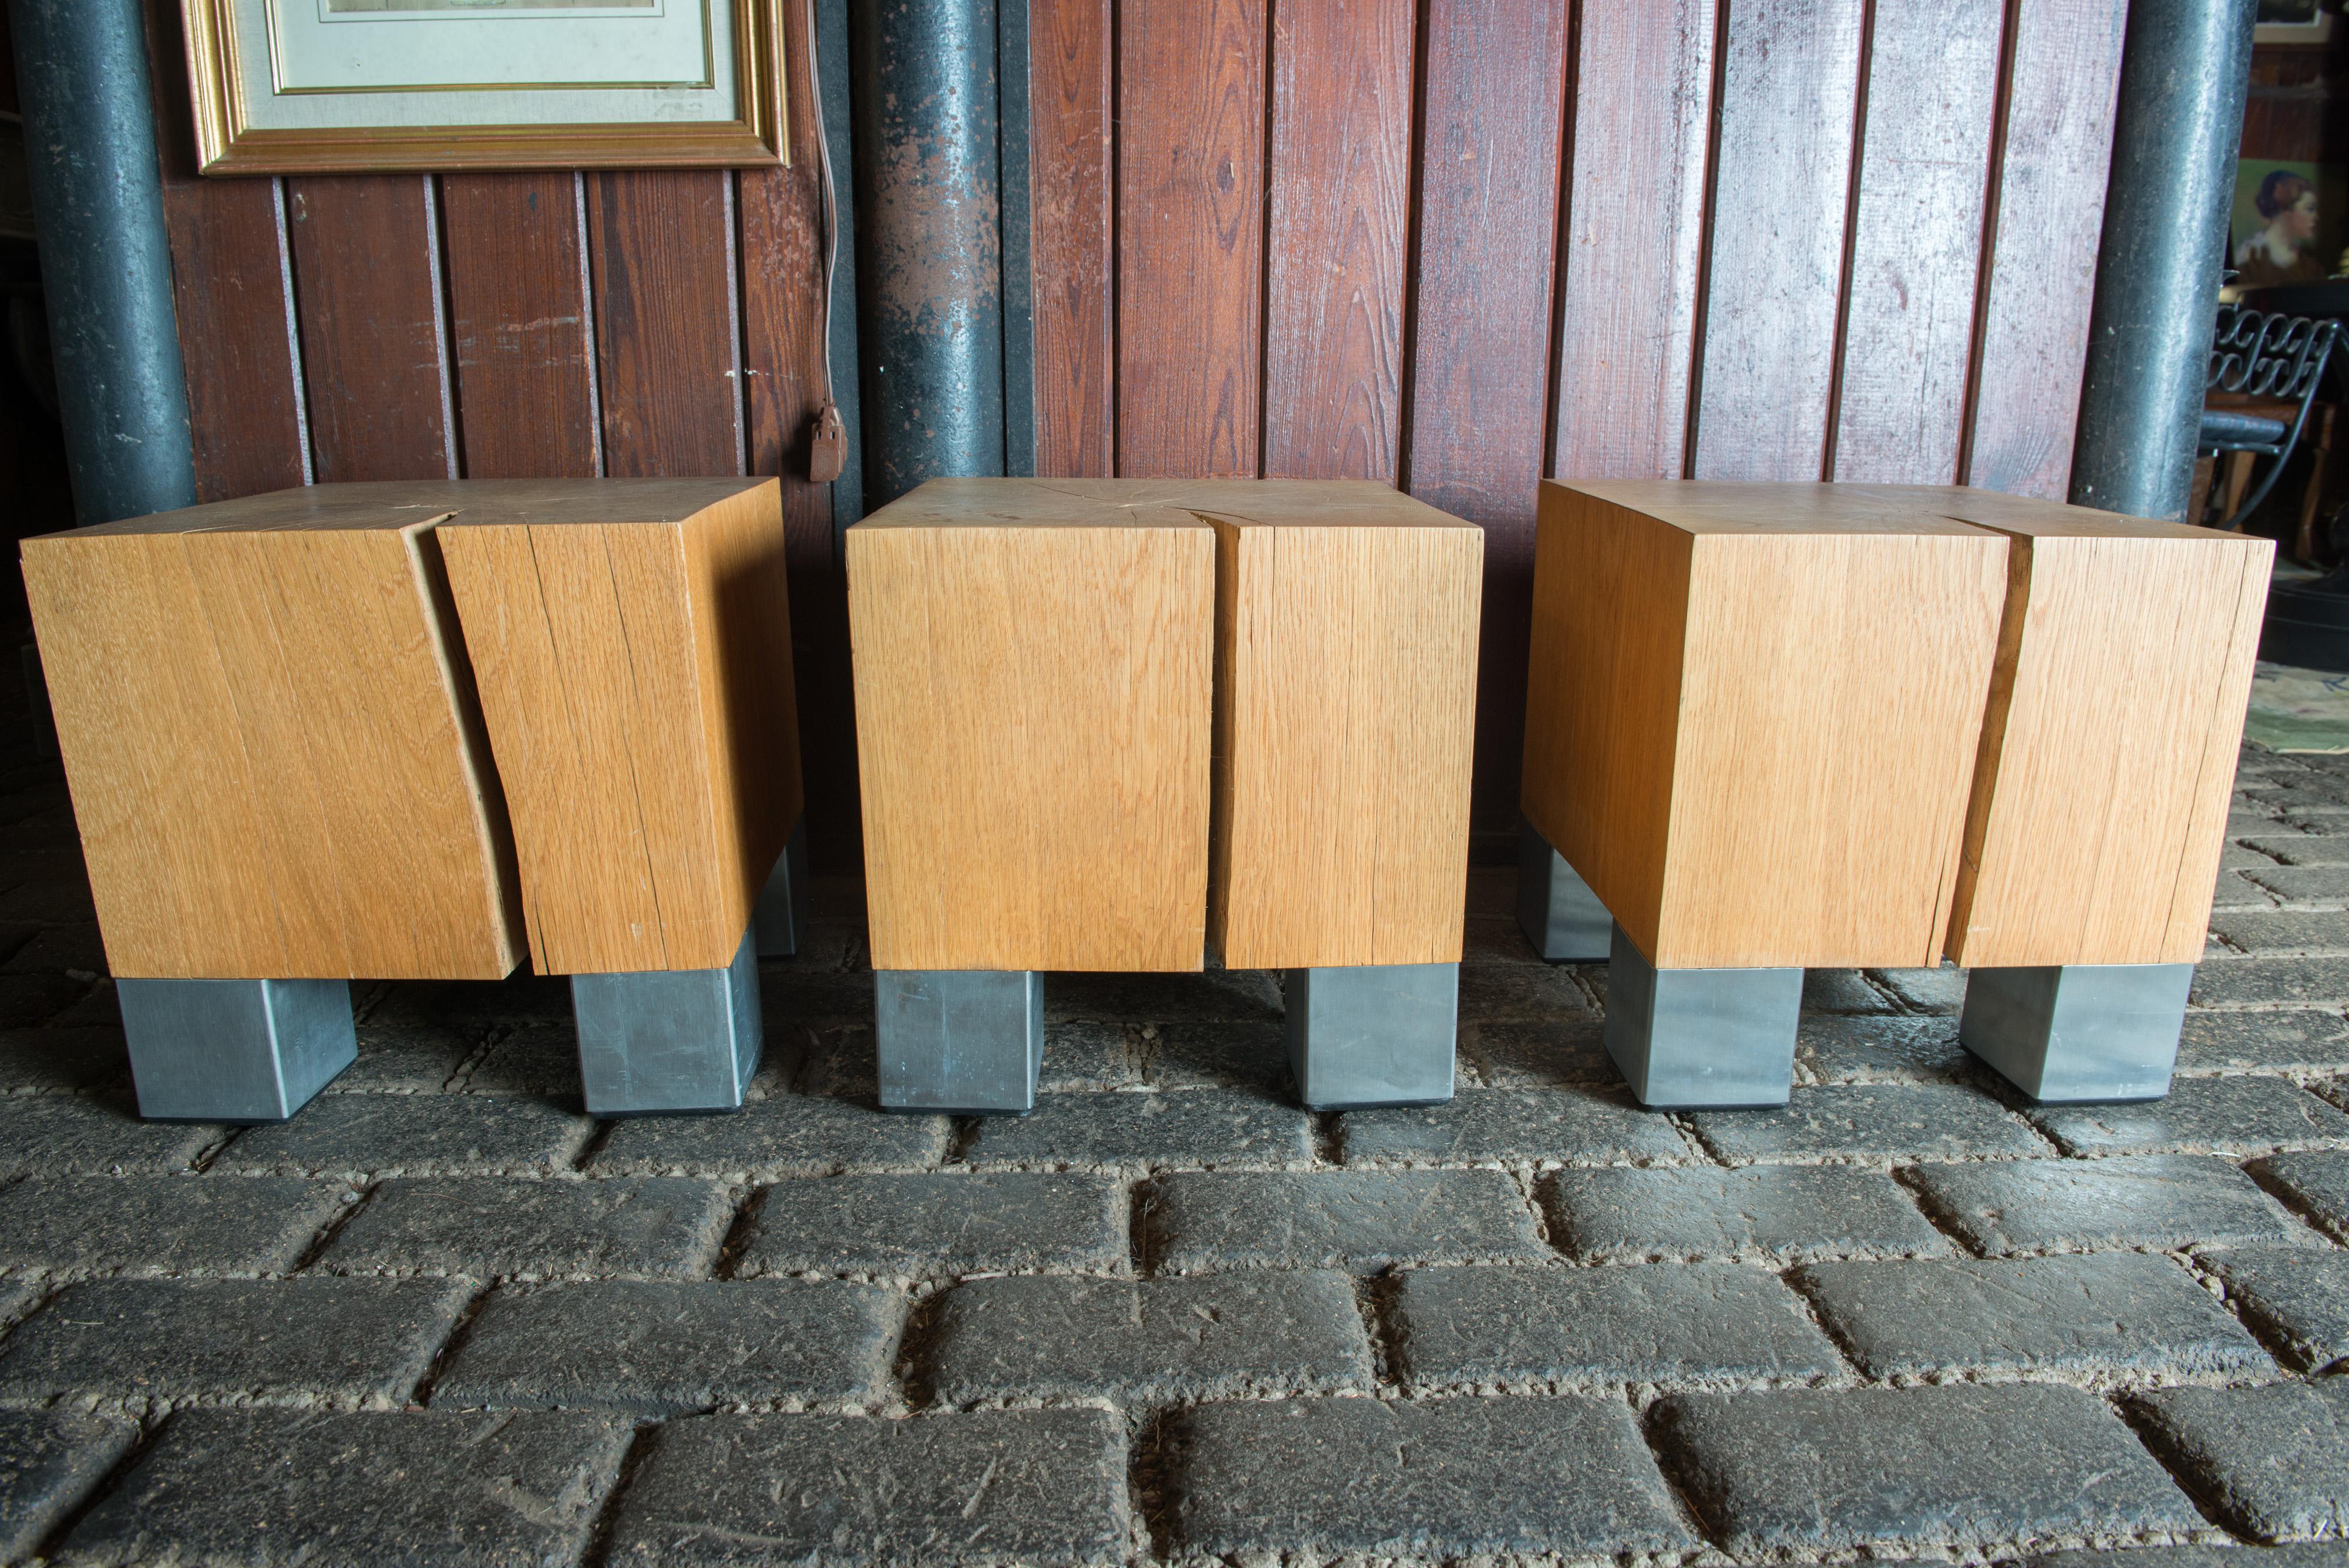 Three stunning handcrafted single solid oak cube modern tables with steel feet. Organic and natural tables.